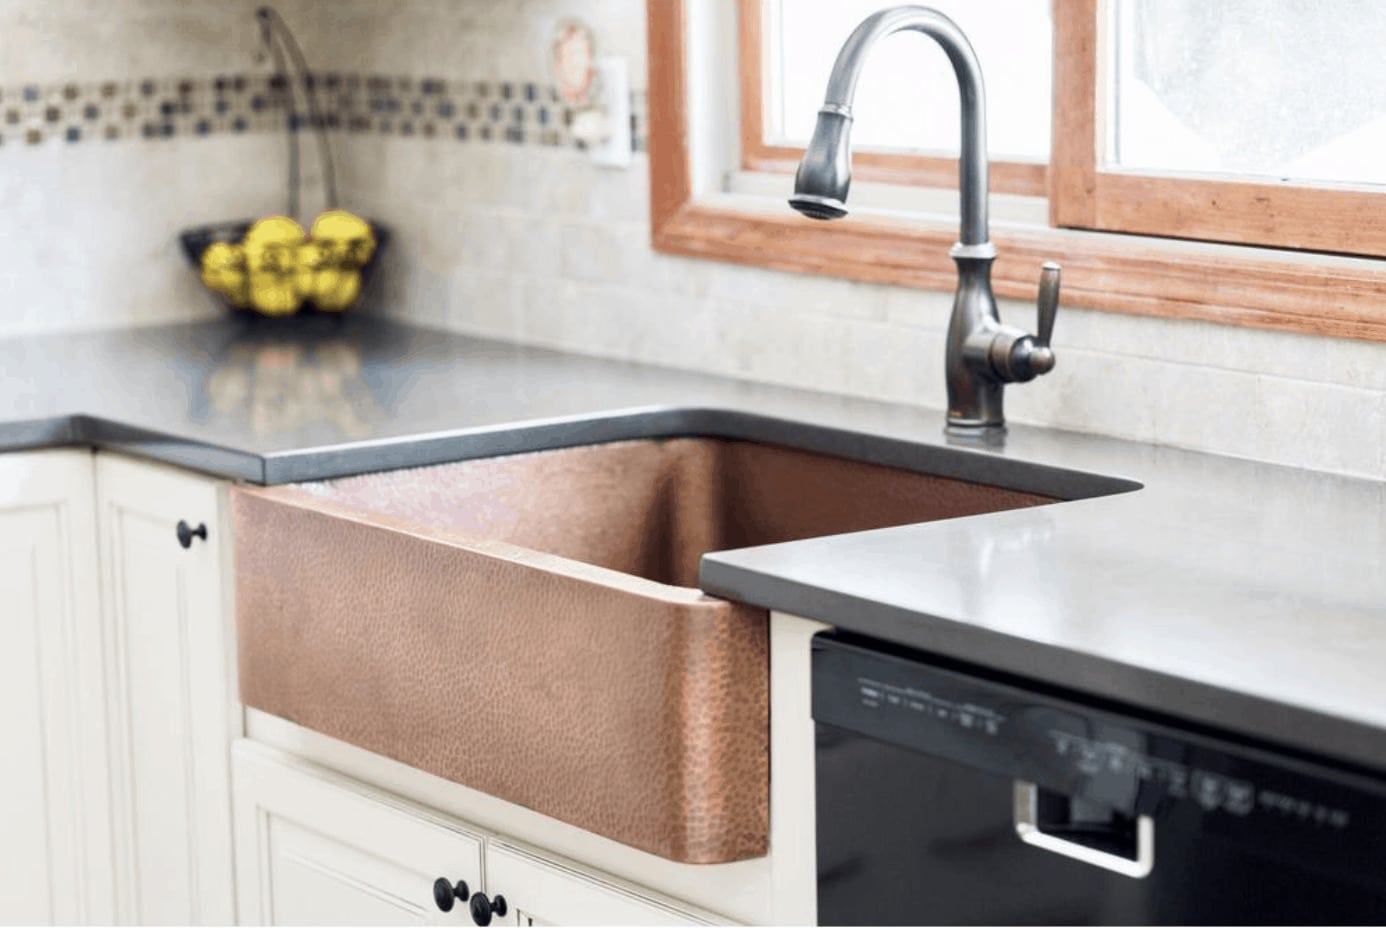 Copper sinks are a new trend we're seeing 